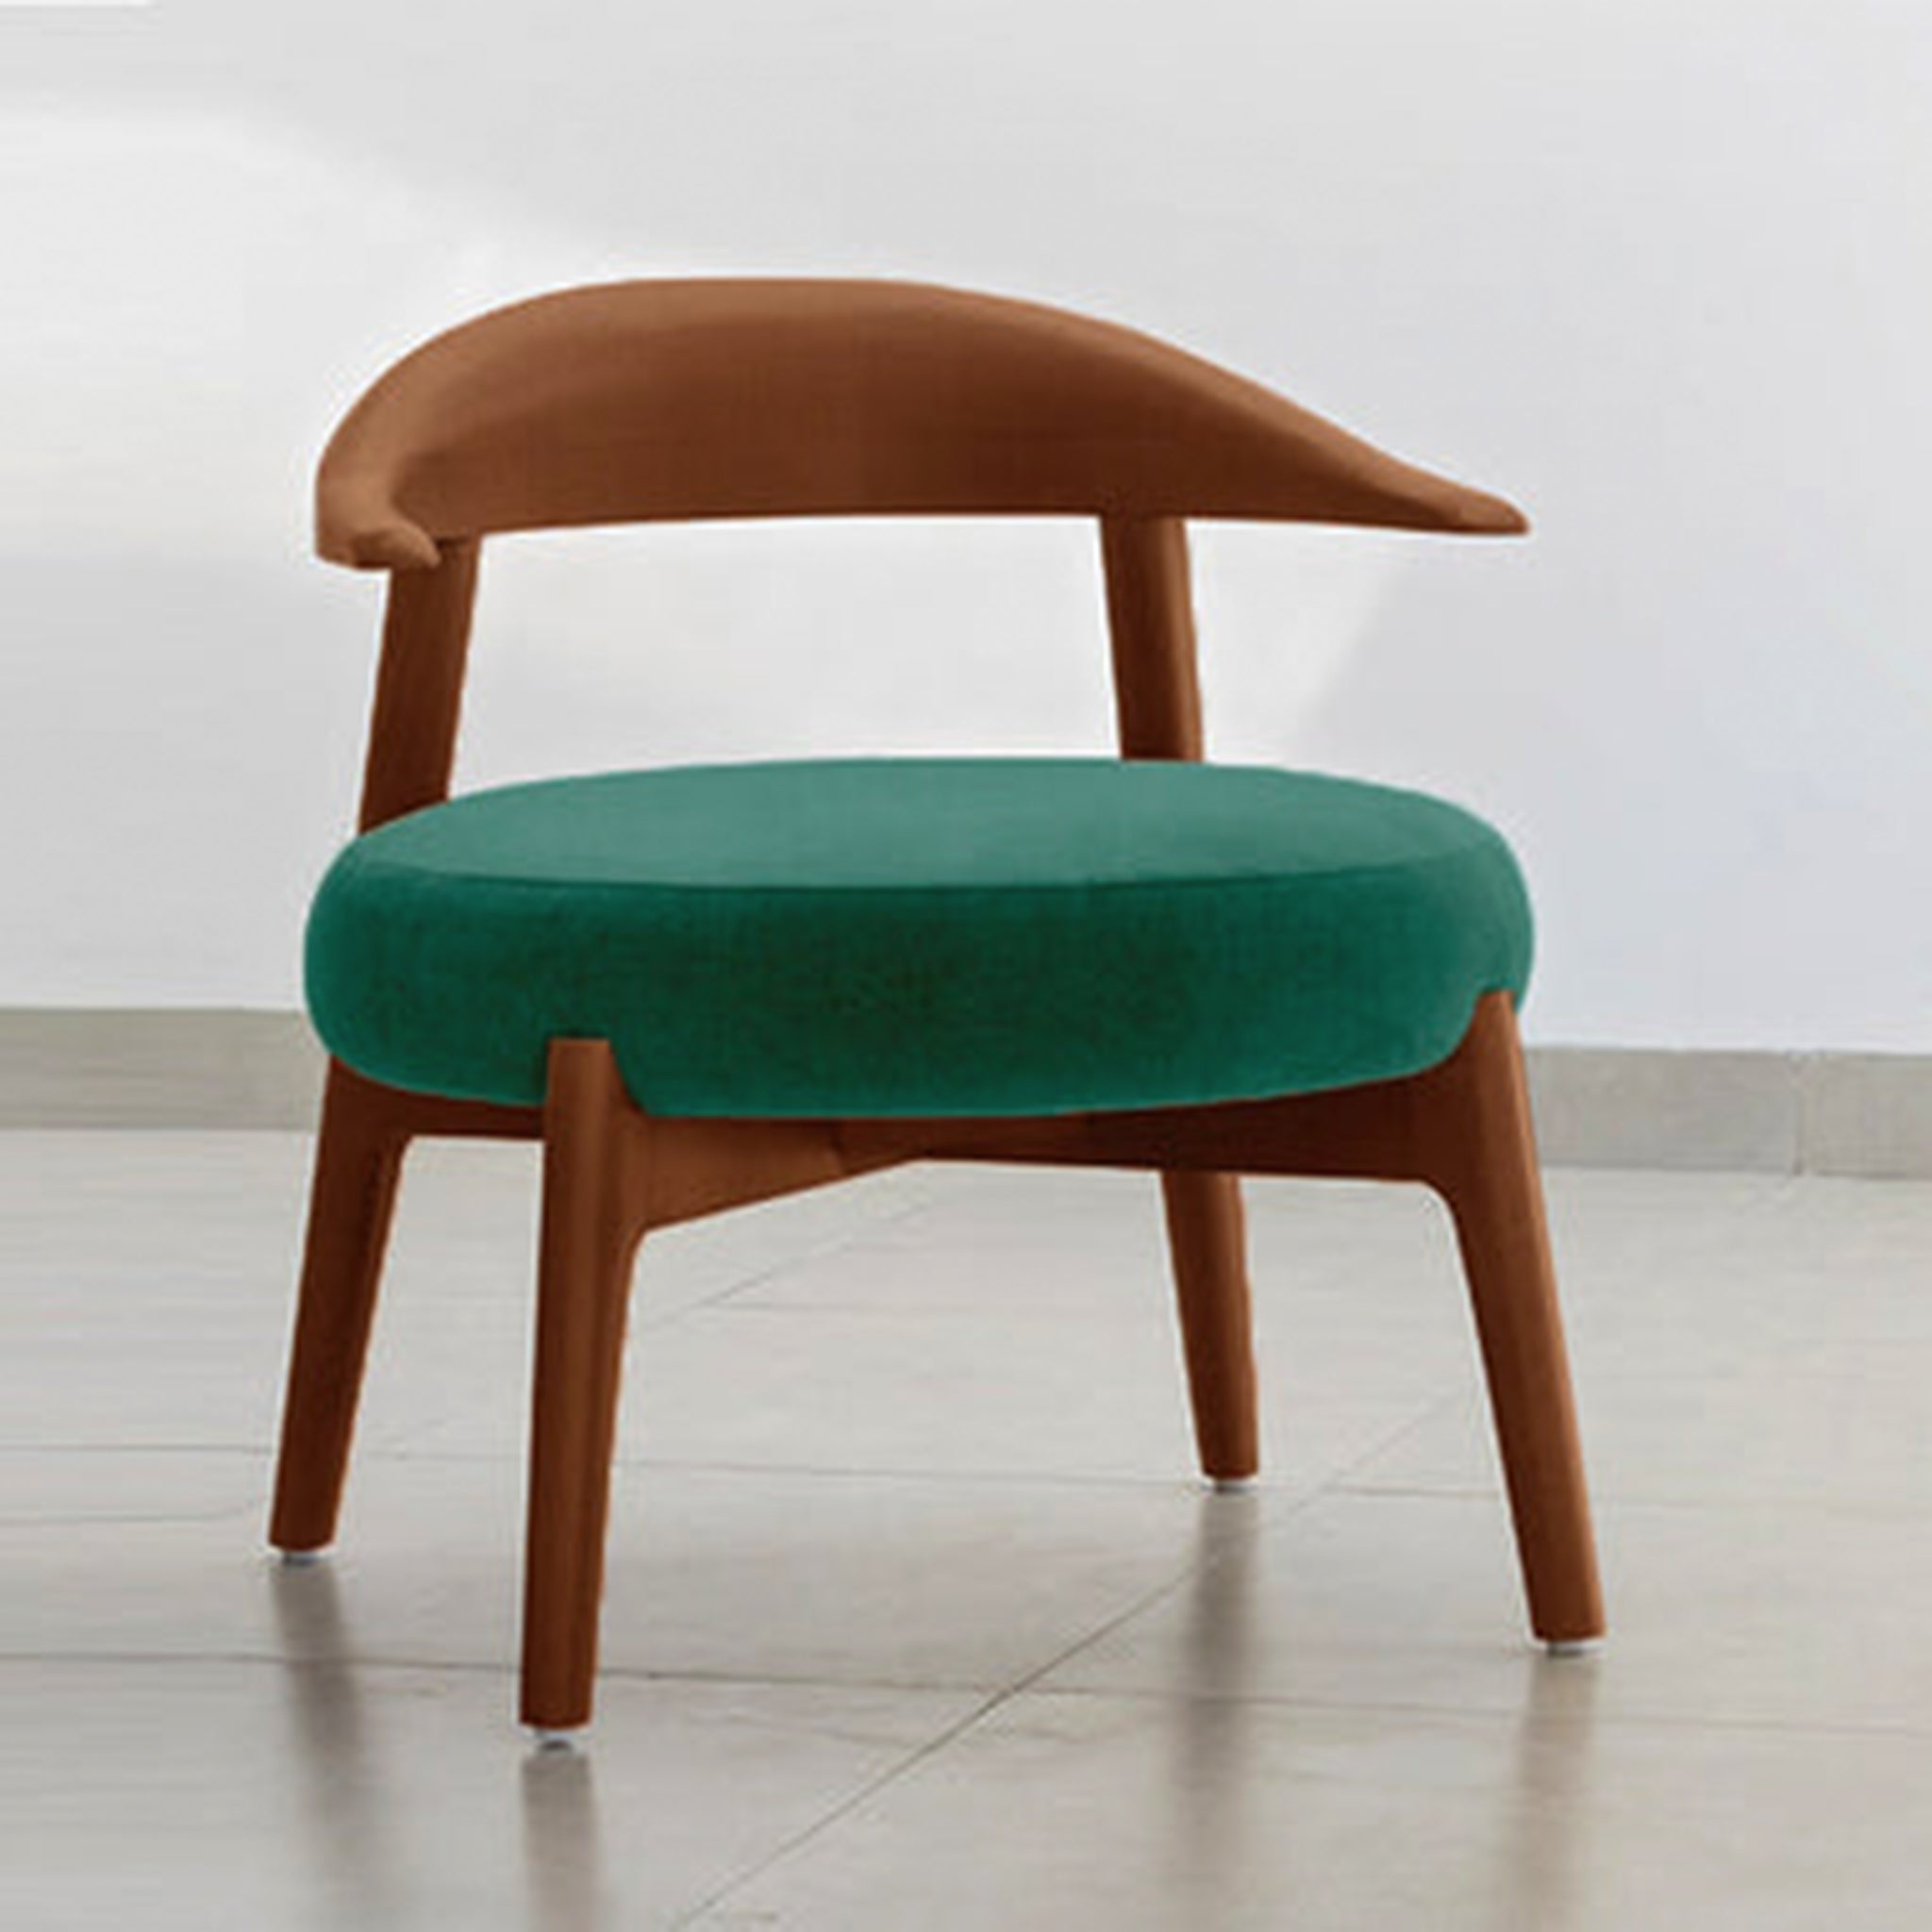 "The Hyde Accent Chair with a sleek wooden frame and plush seating"